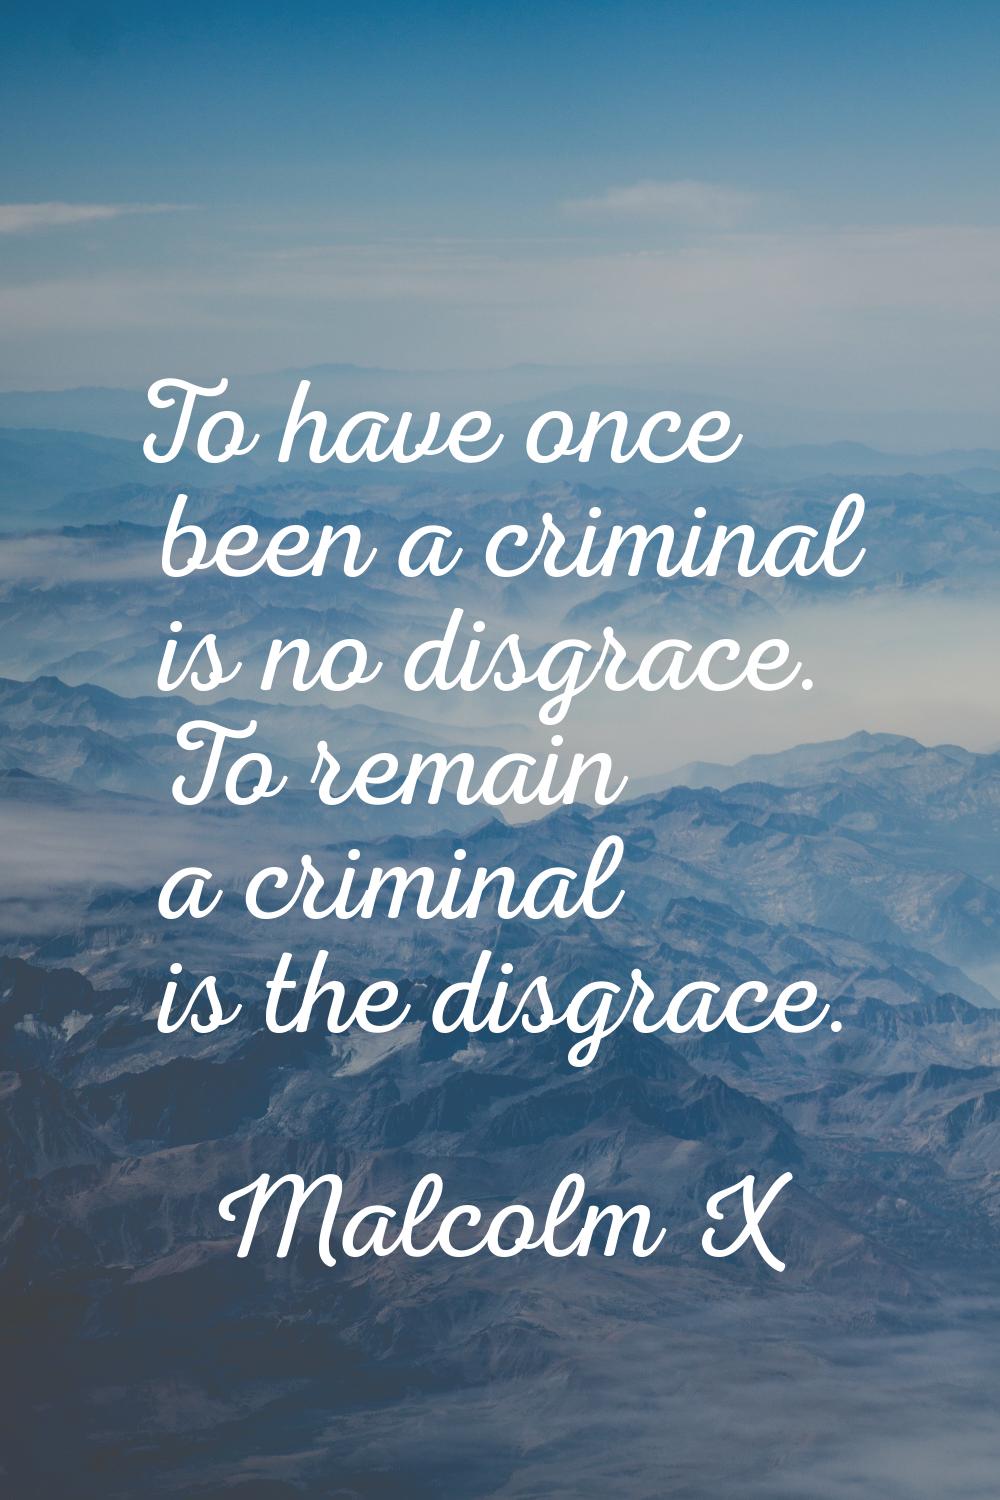 To have once been a criminal is no disgrace. To remain a criminal is the disgrace.